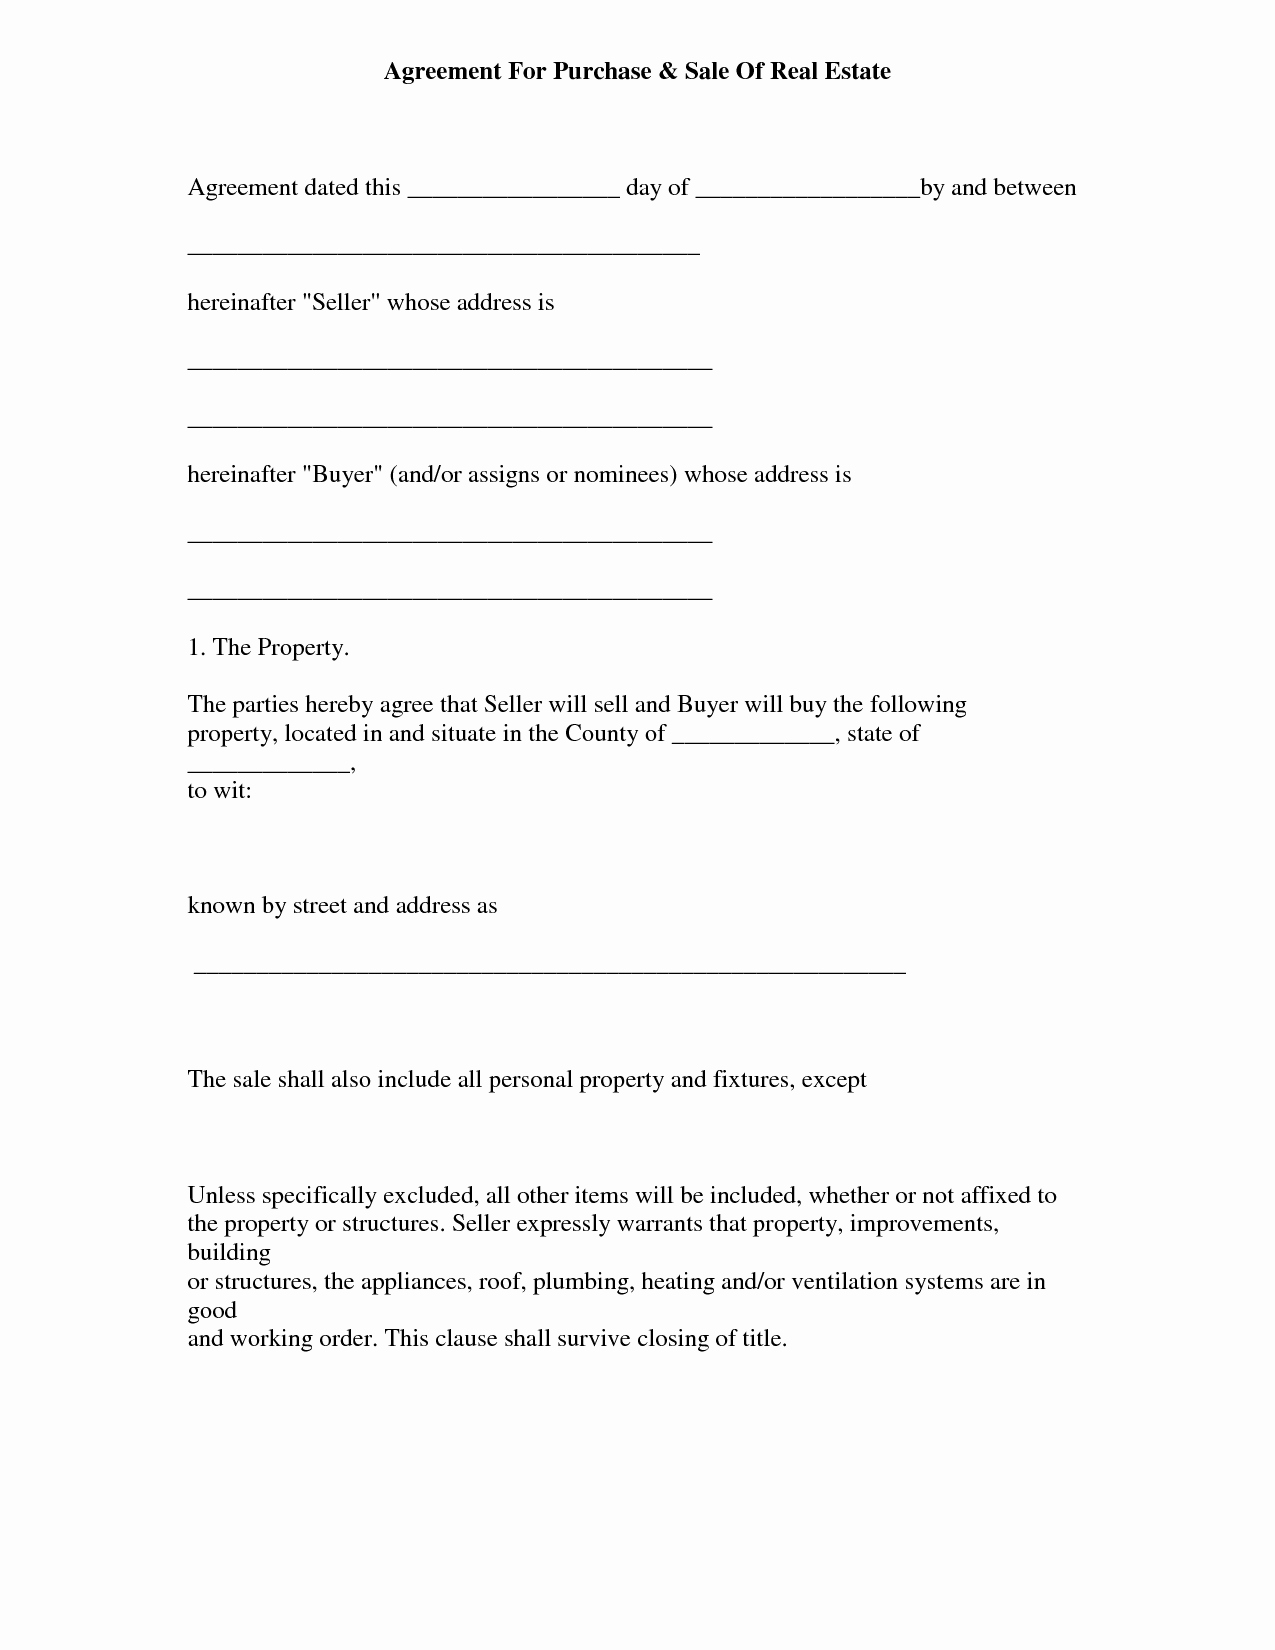 Simple Sales Agreement Template Fresh Simple Land Purchase Agreement form